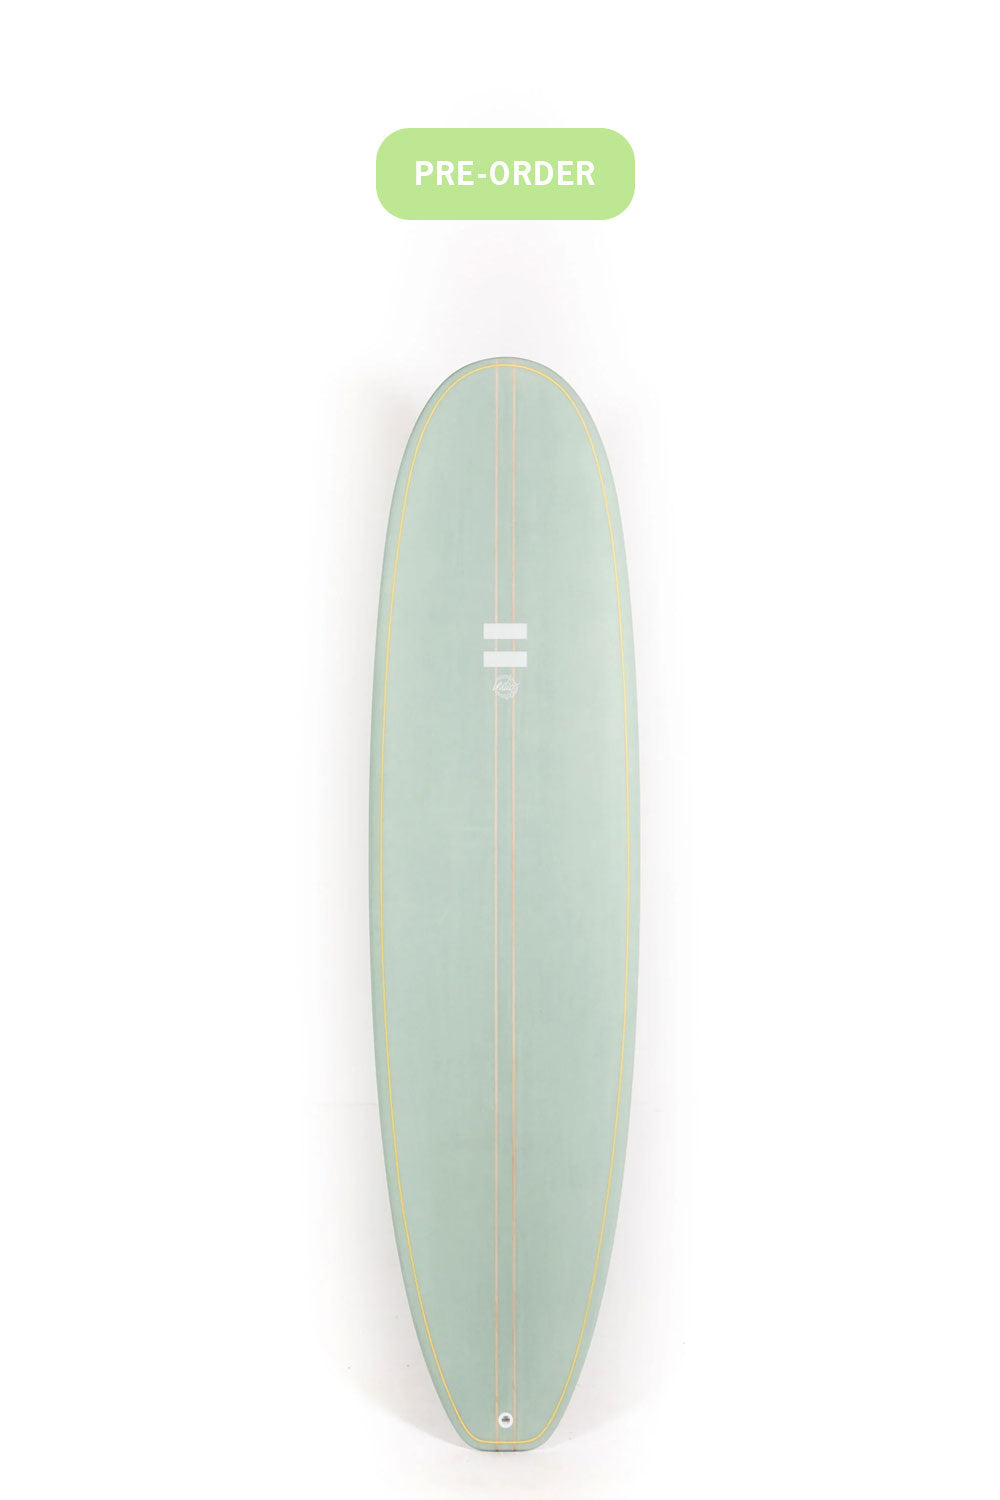 Indio Surfboards - MID LENGTH Mint - 7'0